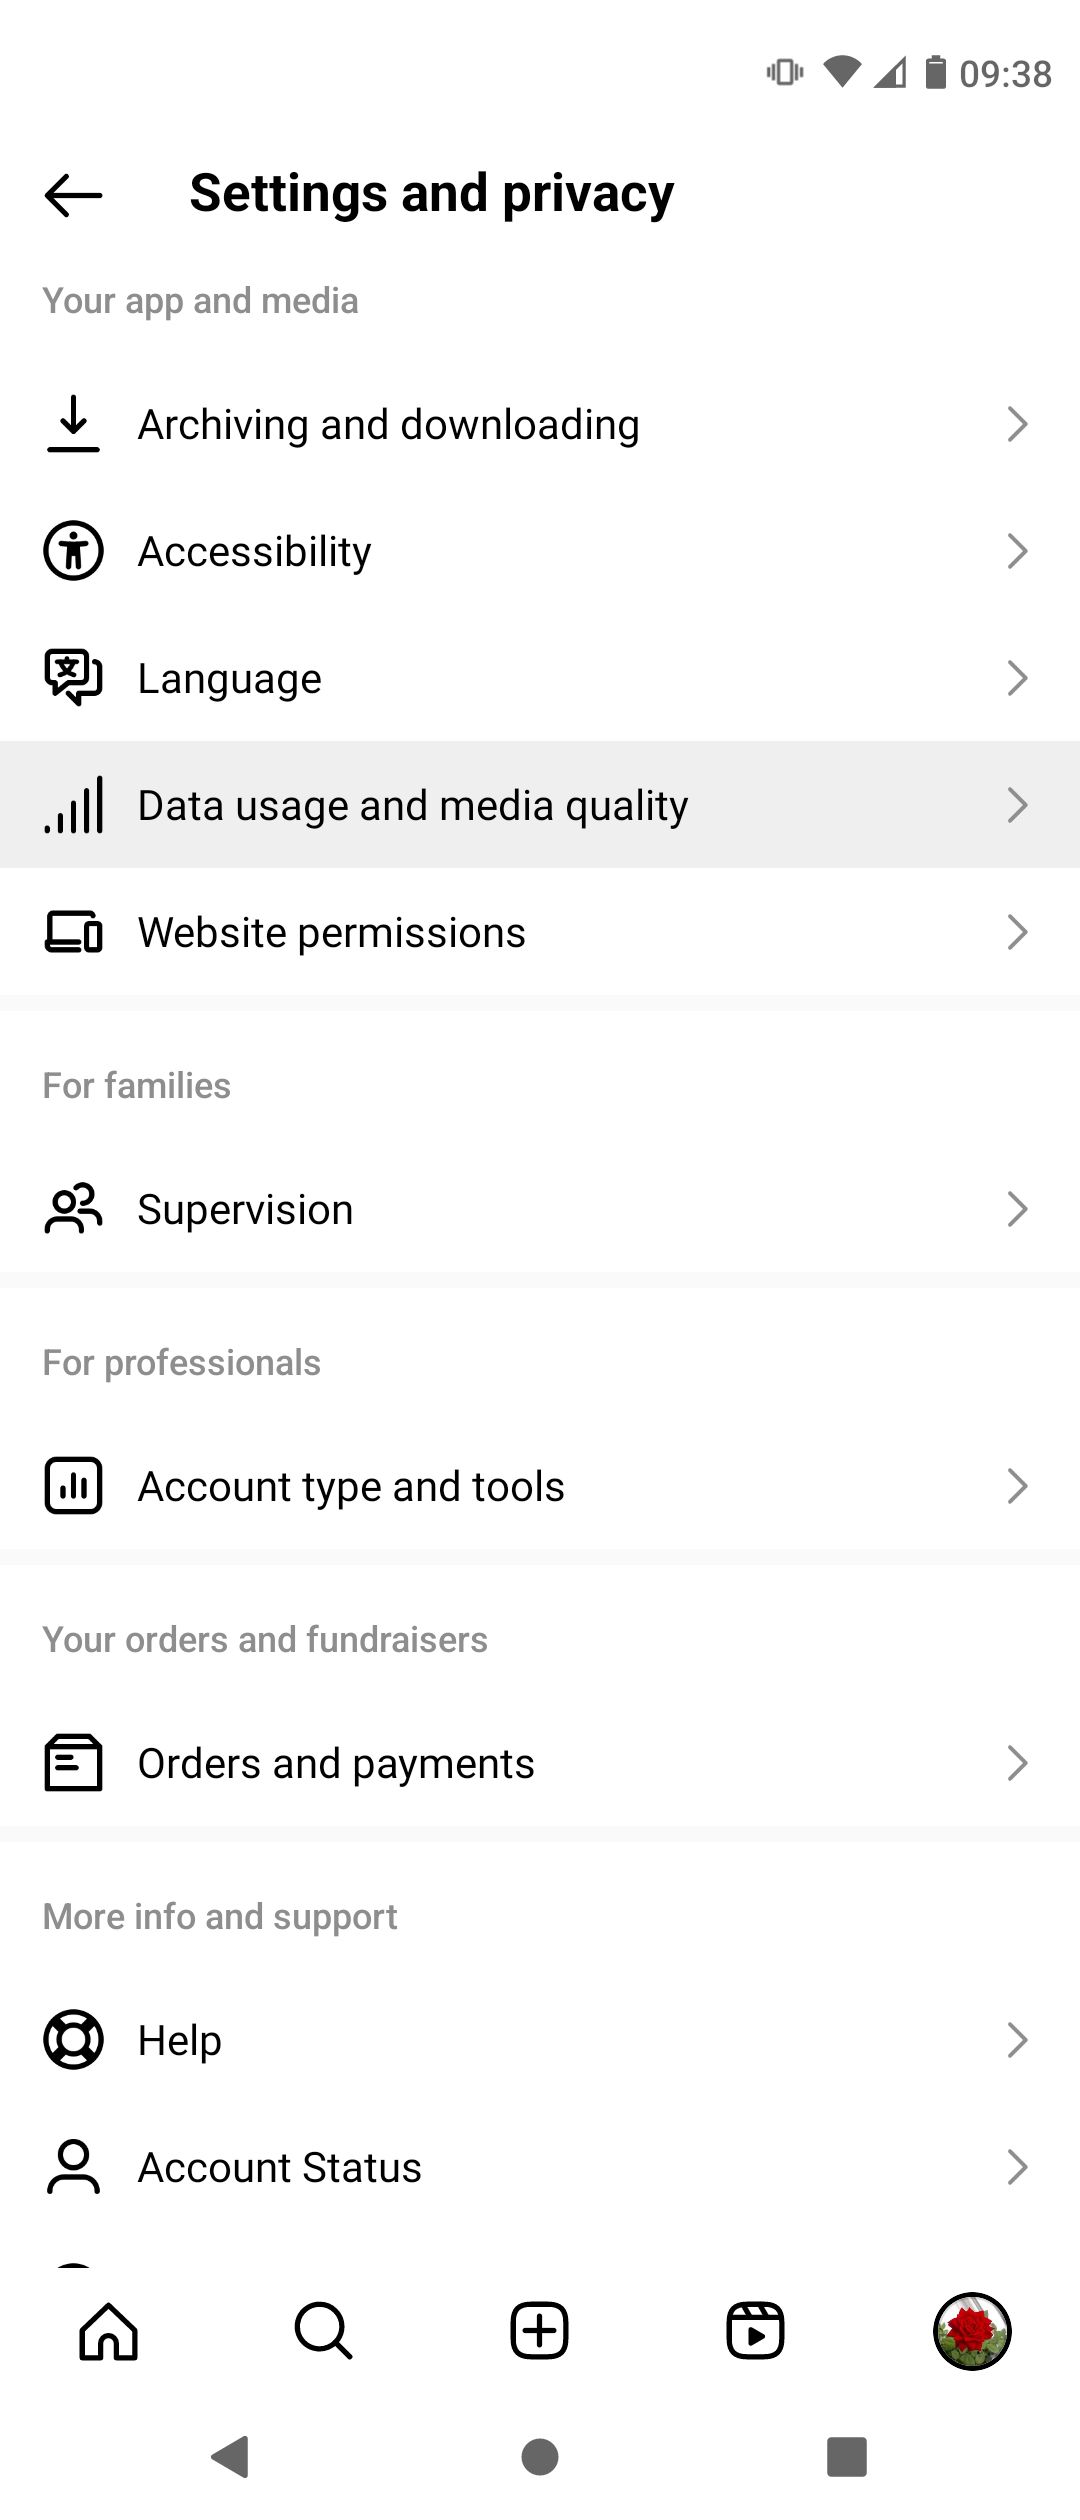 Selecting Data Usage and Media Quality Settings on Instagram